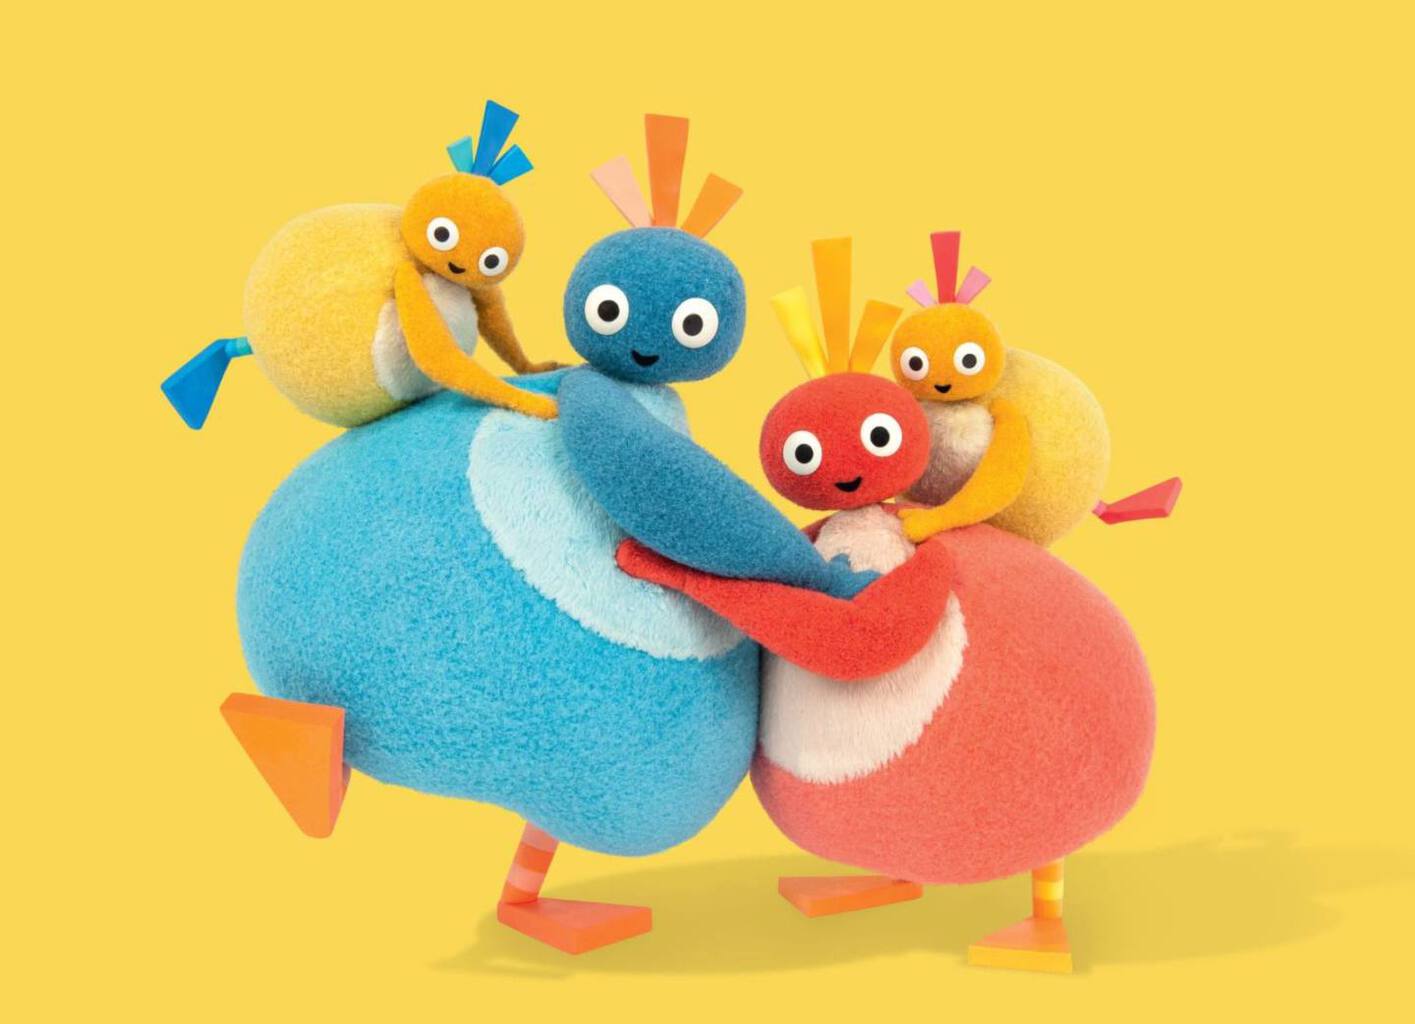 Twirlywoos Live! Comes to The Lowry - Win Tickets